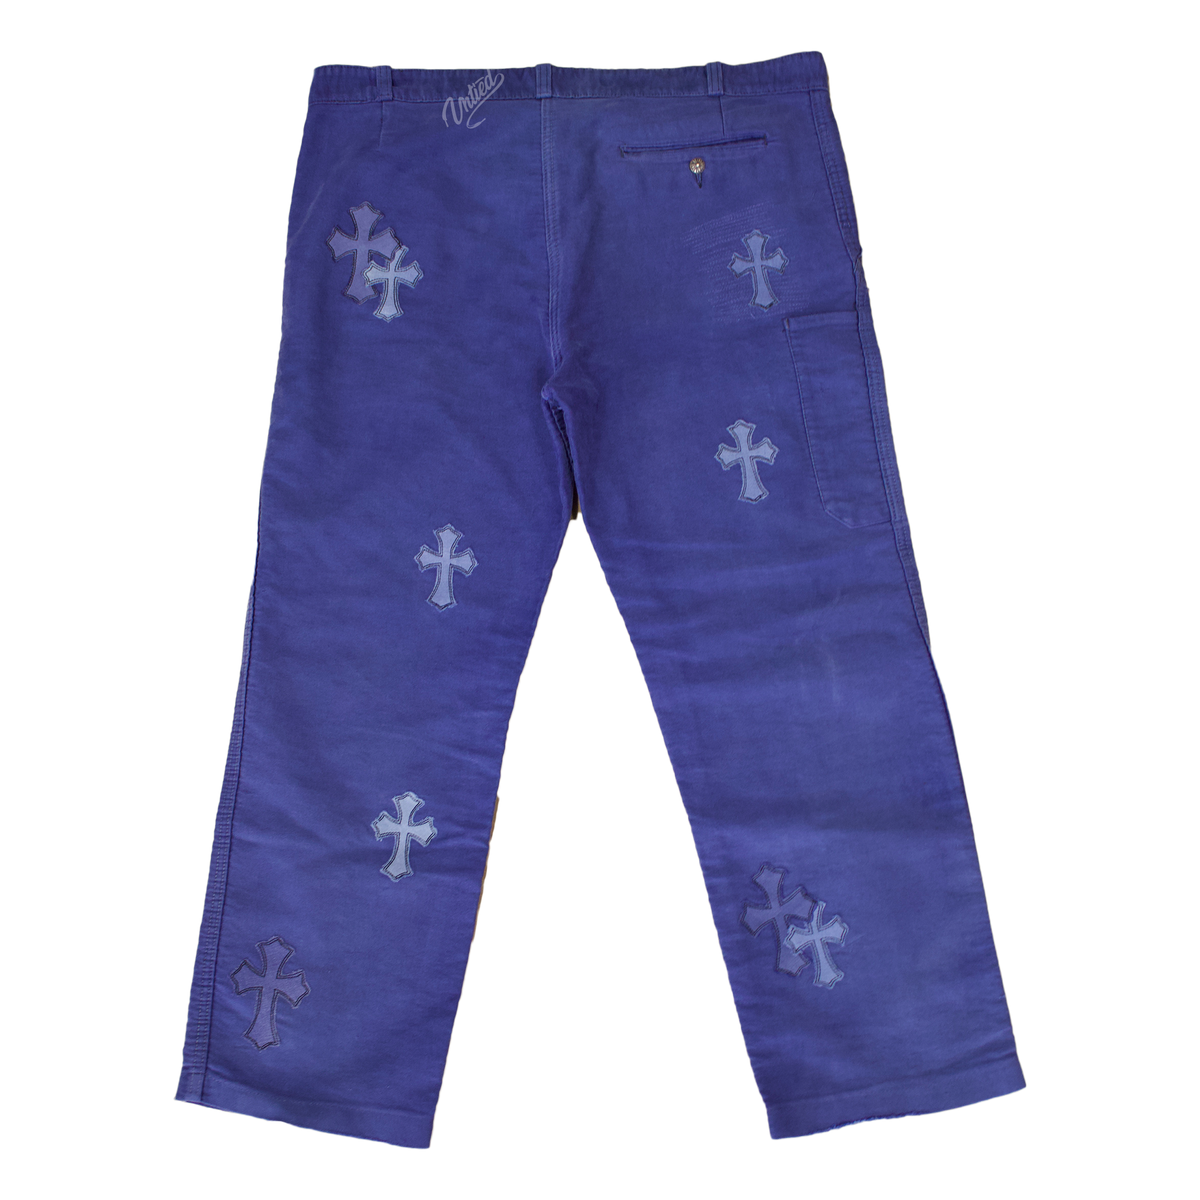 Chrome Hearts French Workwear Pants "Blue"